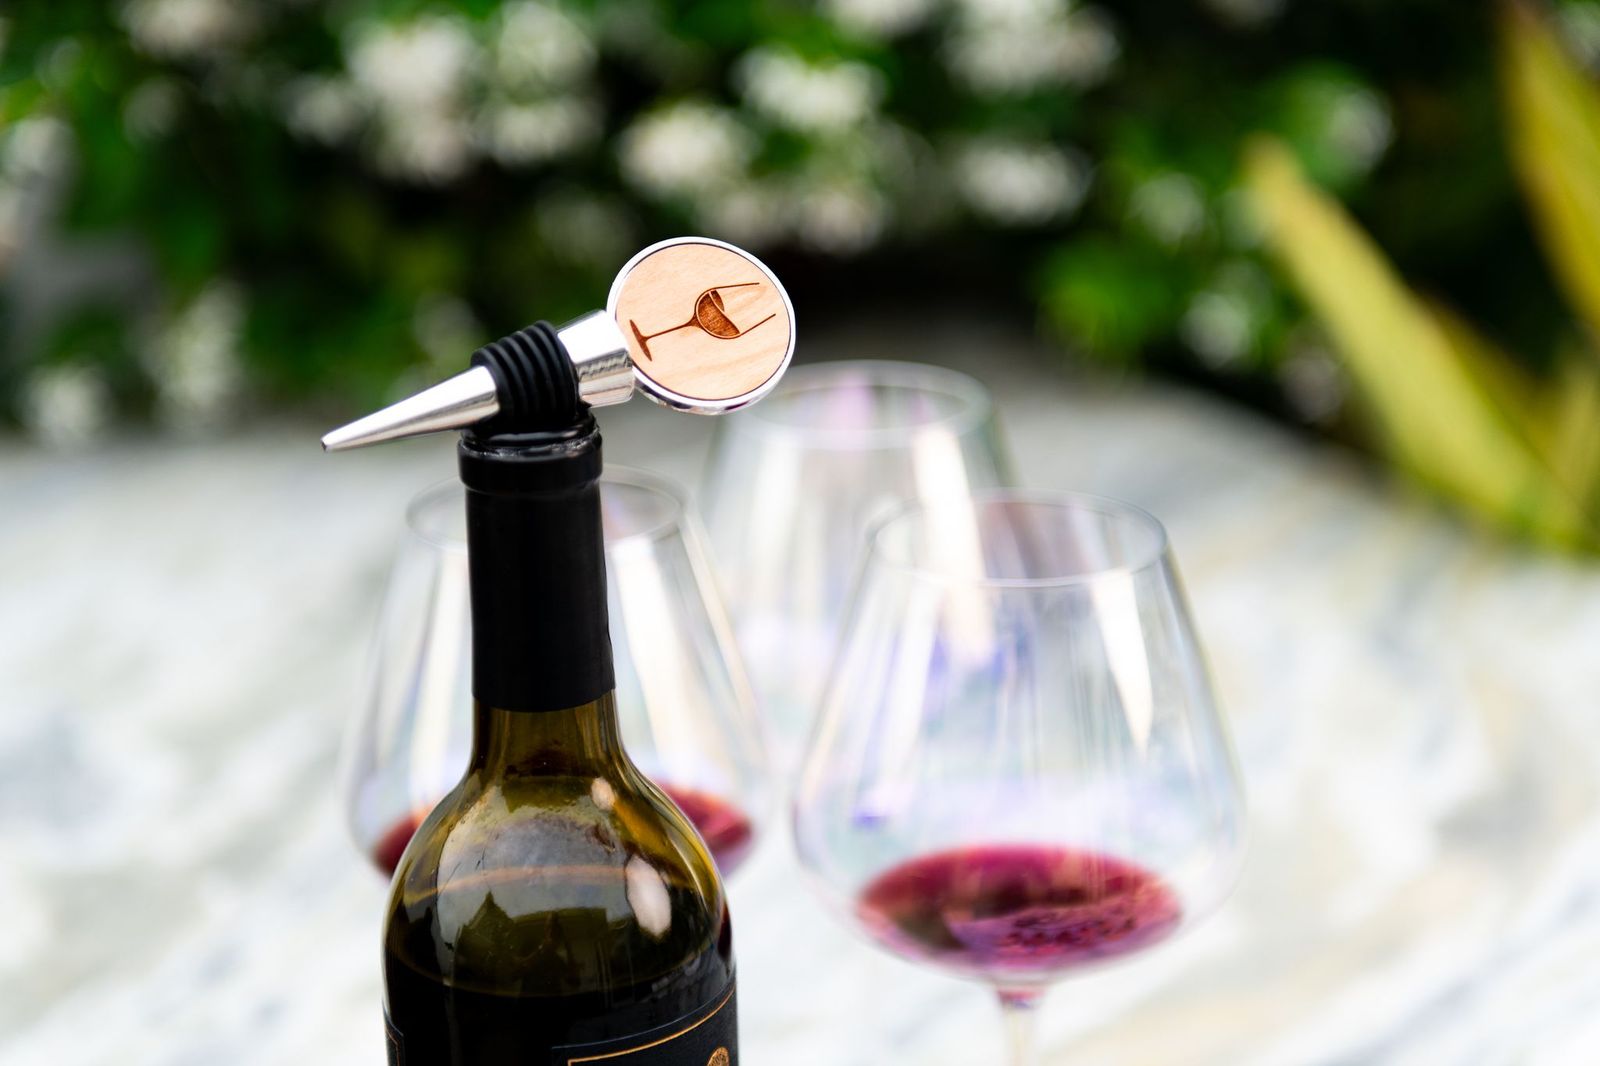 Personalized Circle Metal Wine Bottle Stoppers